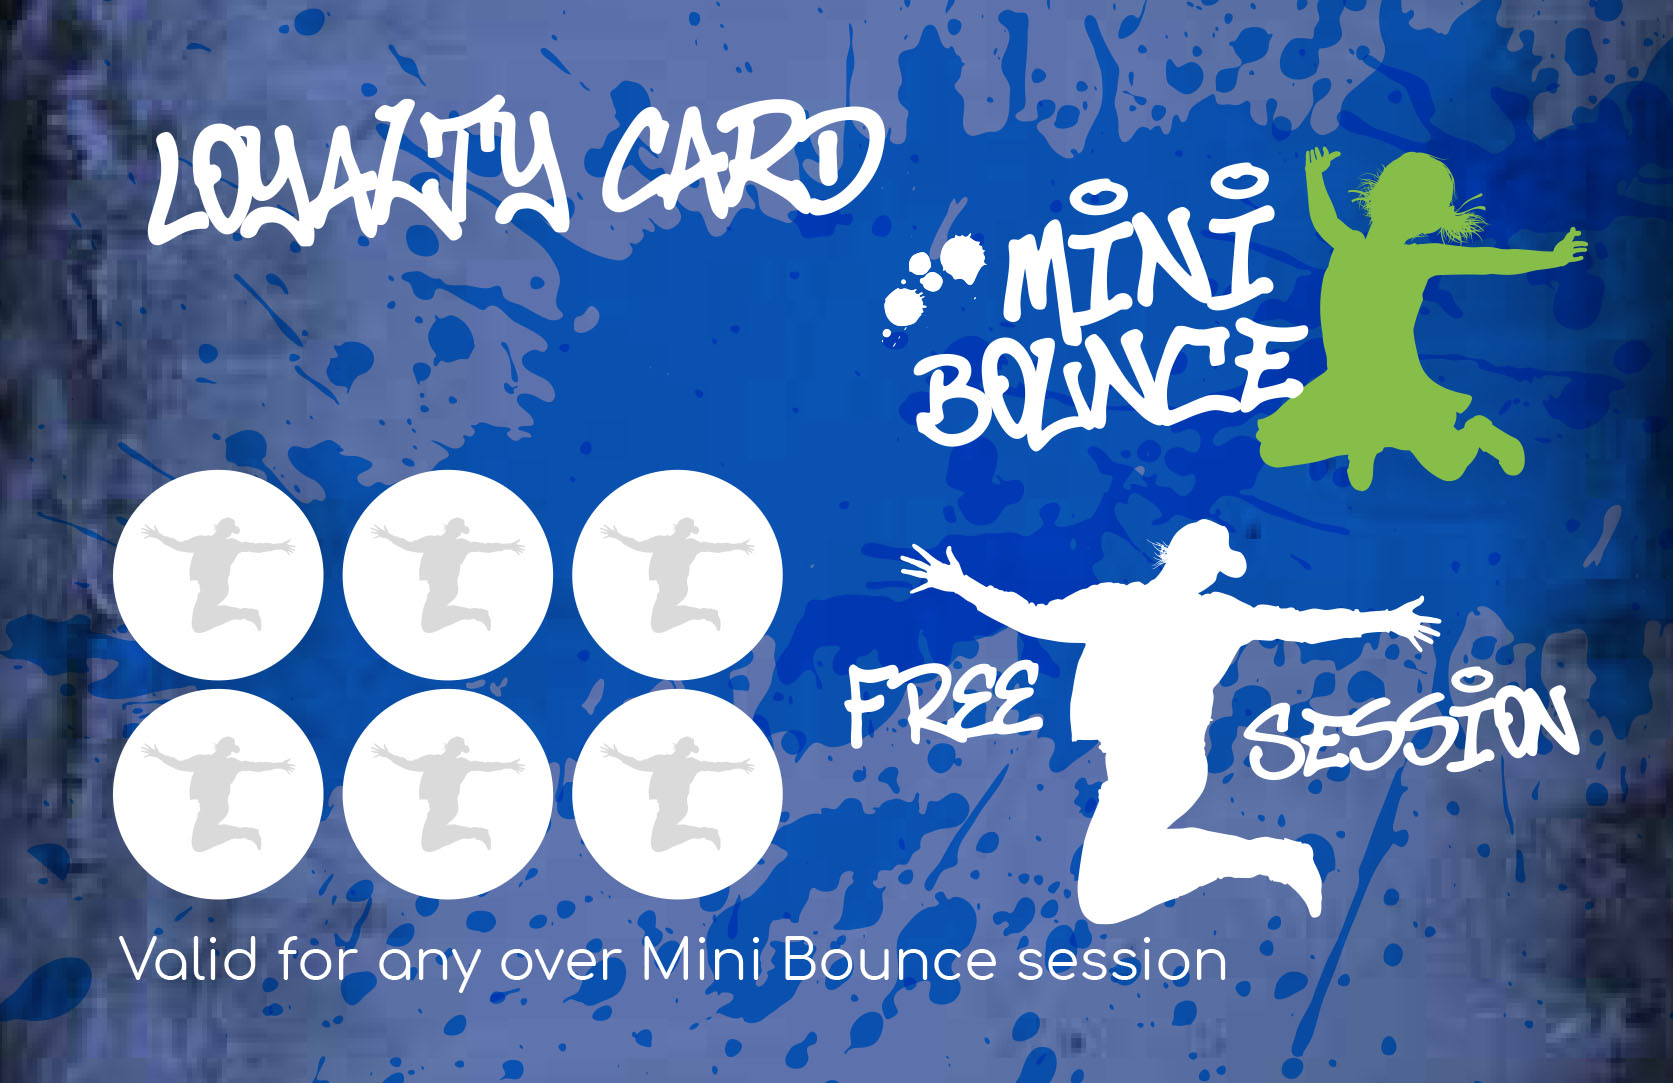 picture of the mini bounce loyalty card to help combat trampoline park prices